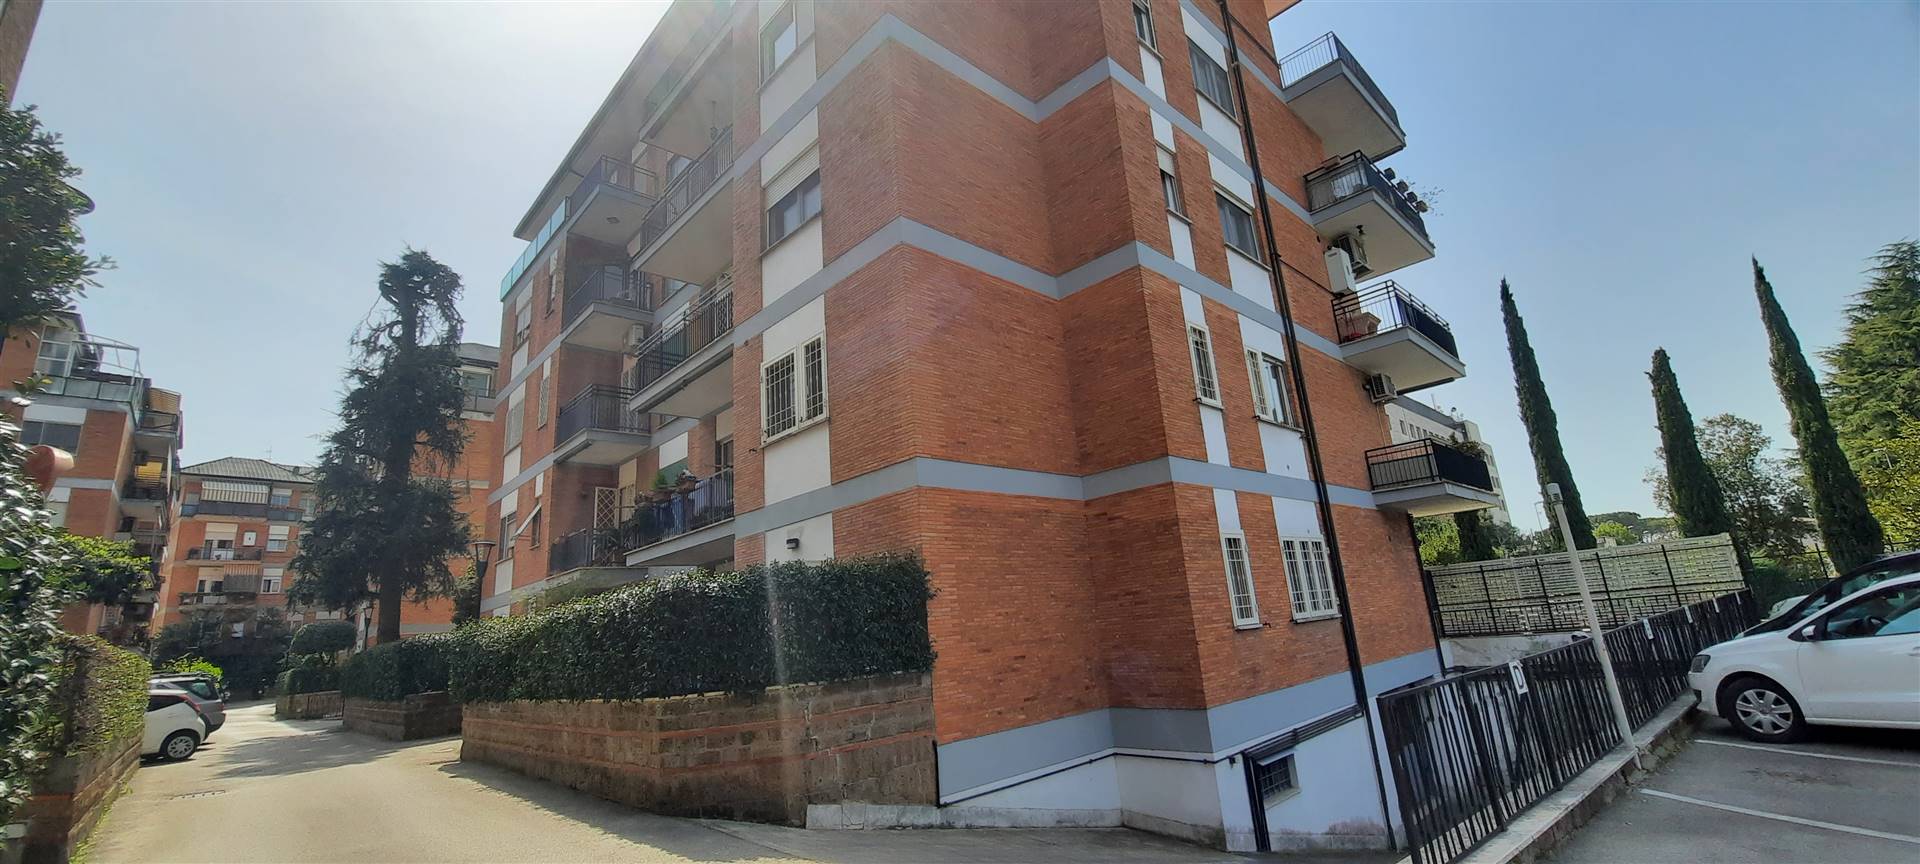 AURELIA, ROMA, Apartment for rent of 60 Sq. mt., Excellent Condition, Heating Individual heating system, Energetic class: G, Epi: 175 kwh/m2 year, placed at 4° on 4, composed by: 2 Rooms, , 1 Bedroom,